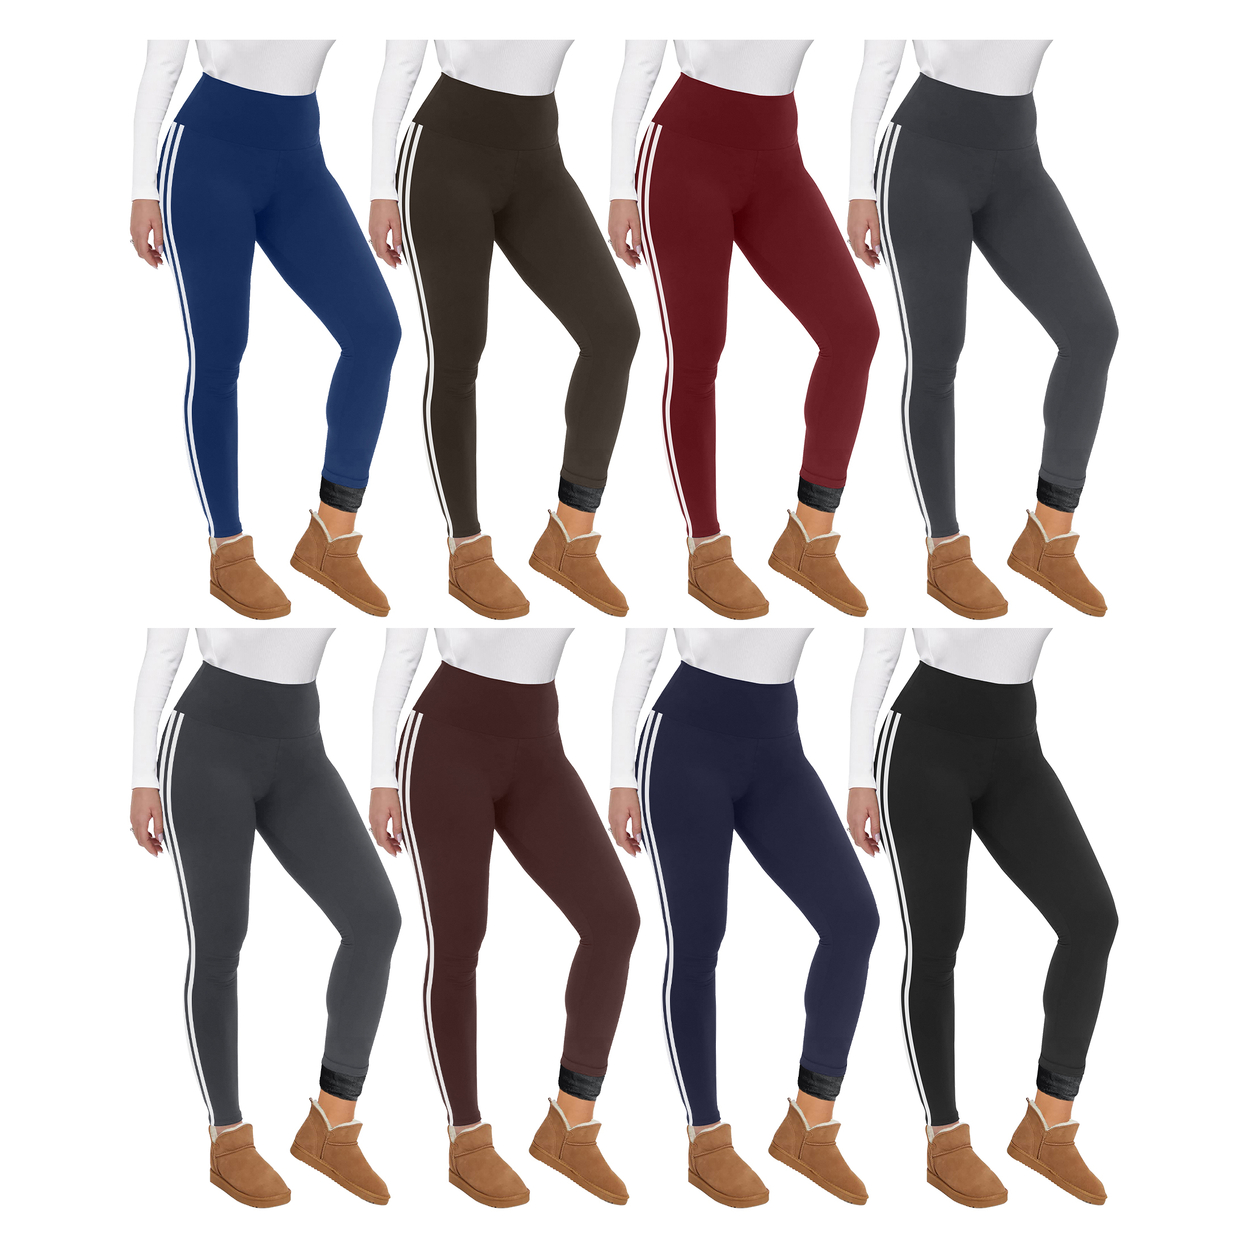 3-Pack: Women's Ultra Soft Winter Warm Cozy Striped Fur Lined Yoga Leggings - Assorted, X-large